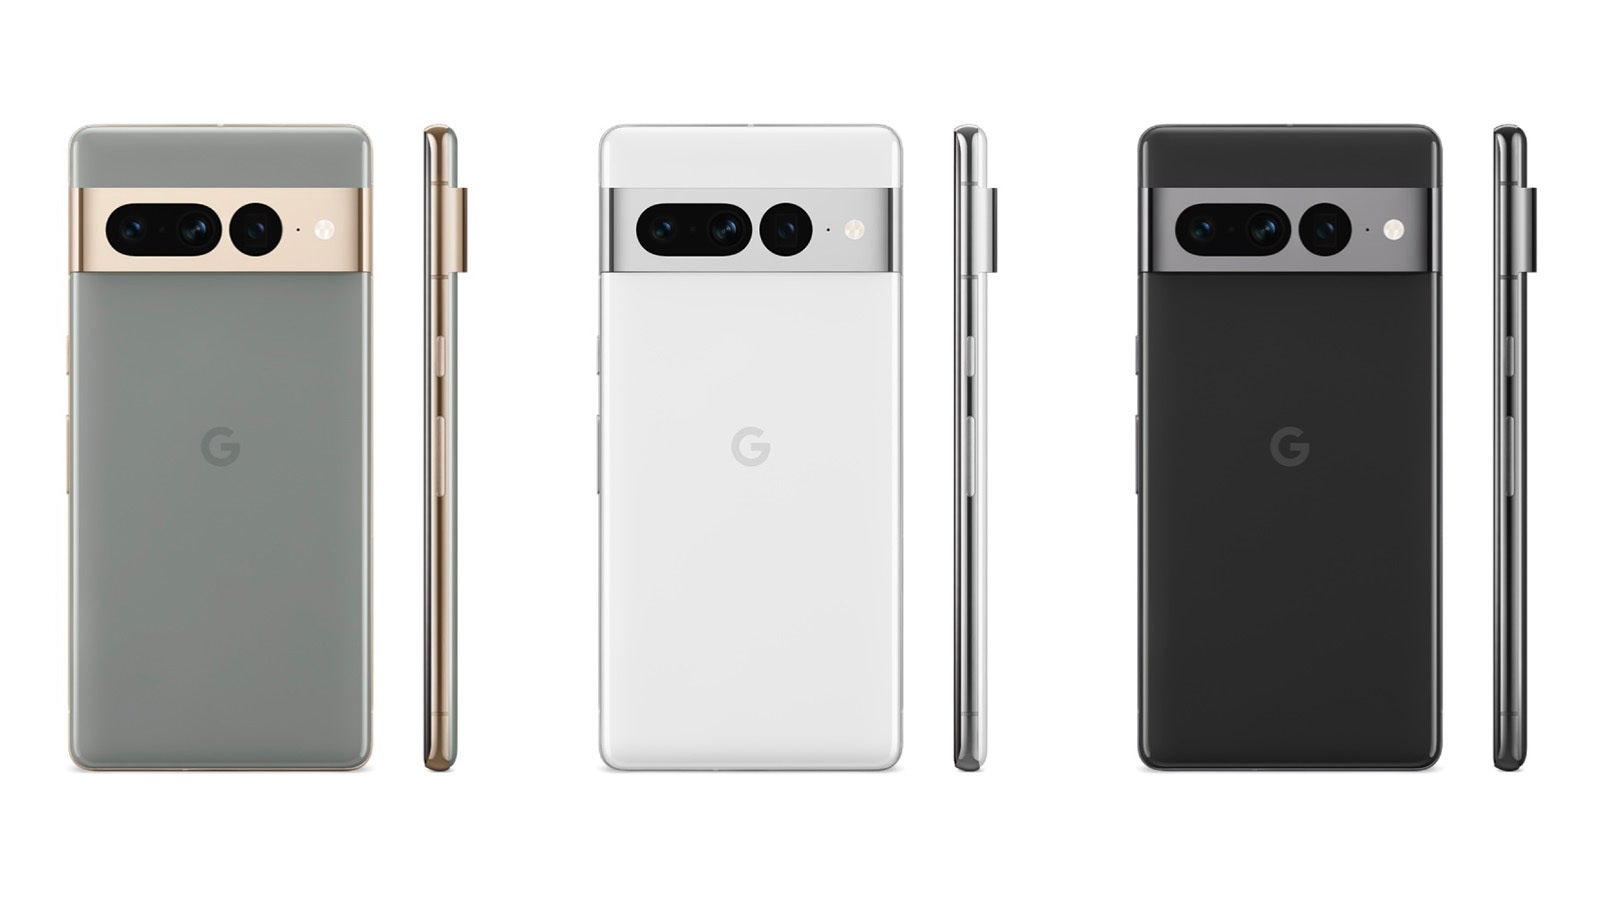 Pixel 7 Pro in Hazel (left), Snow (center), and Obsidian (right) - Google Pixel 7 Pro Review: best features